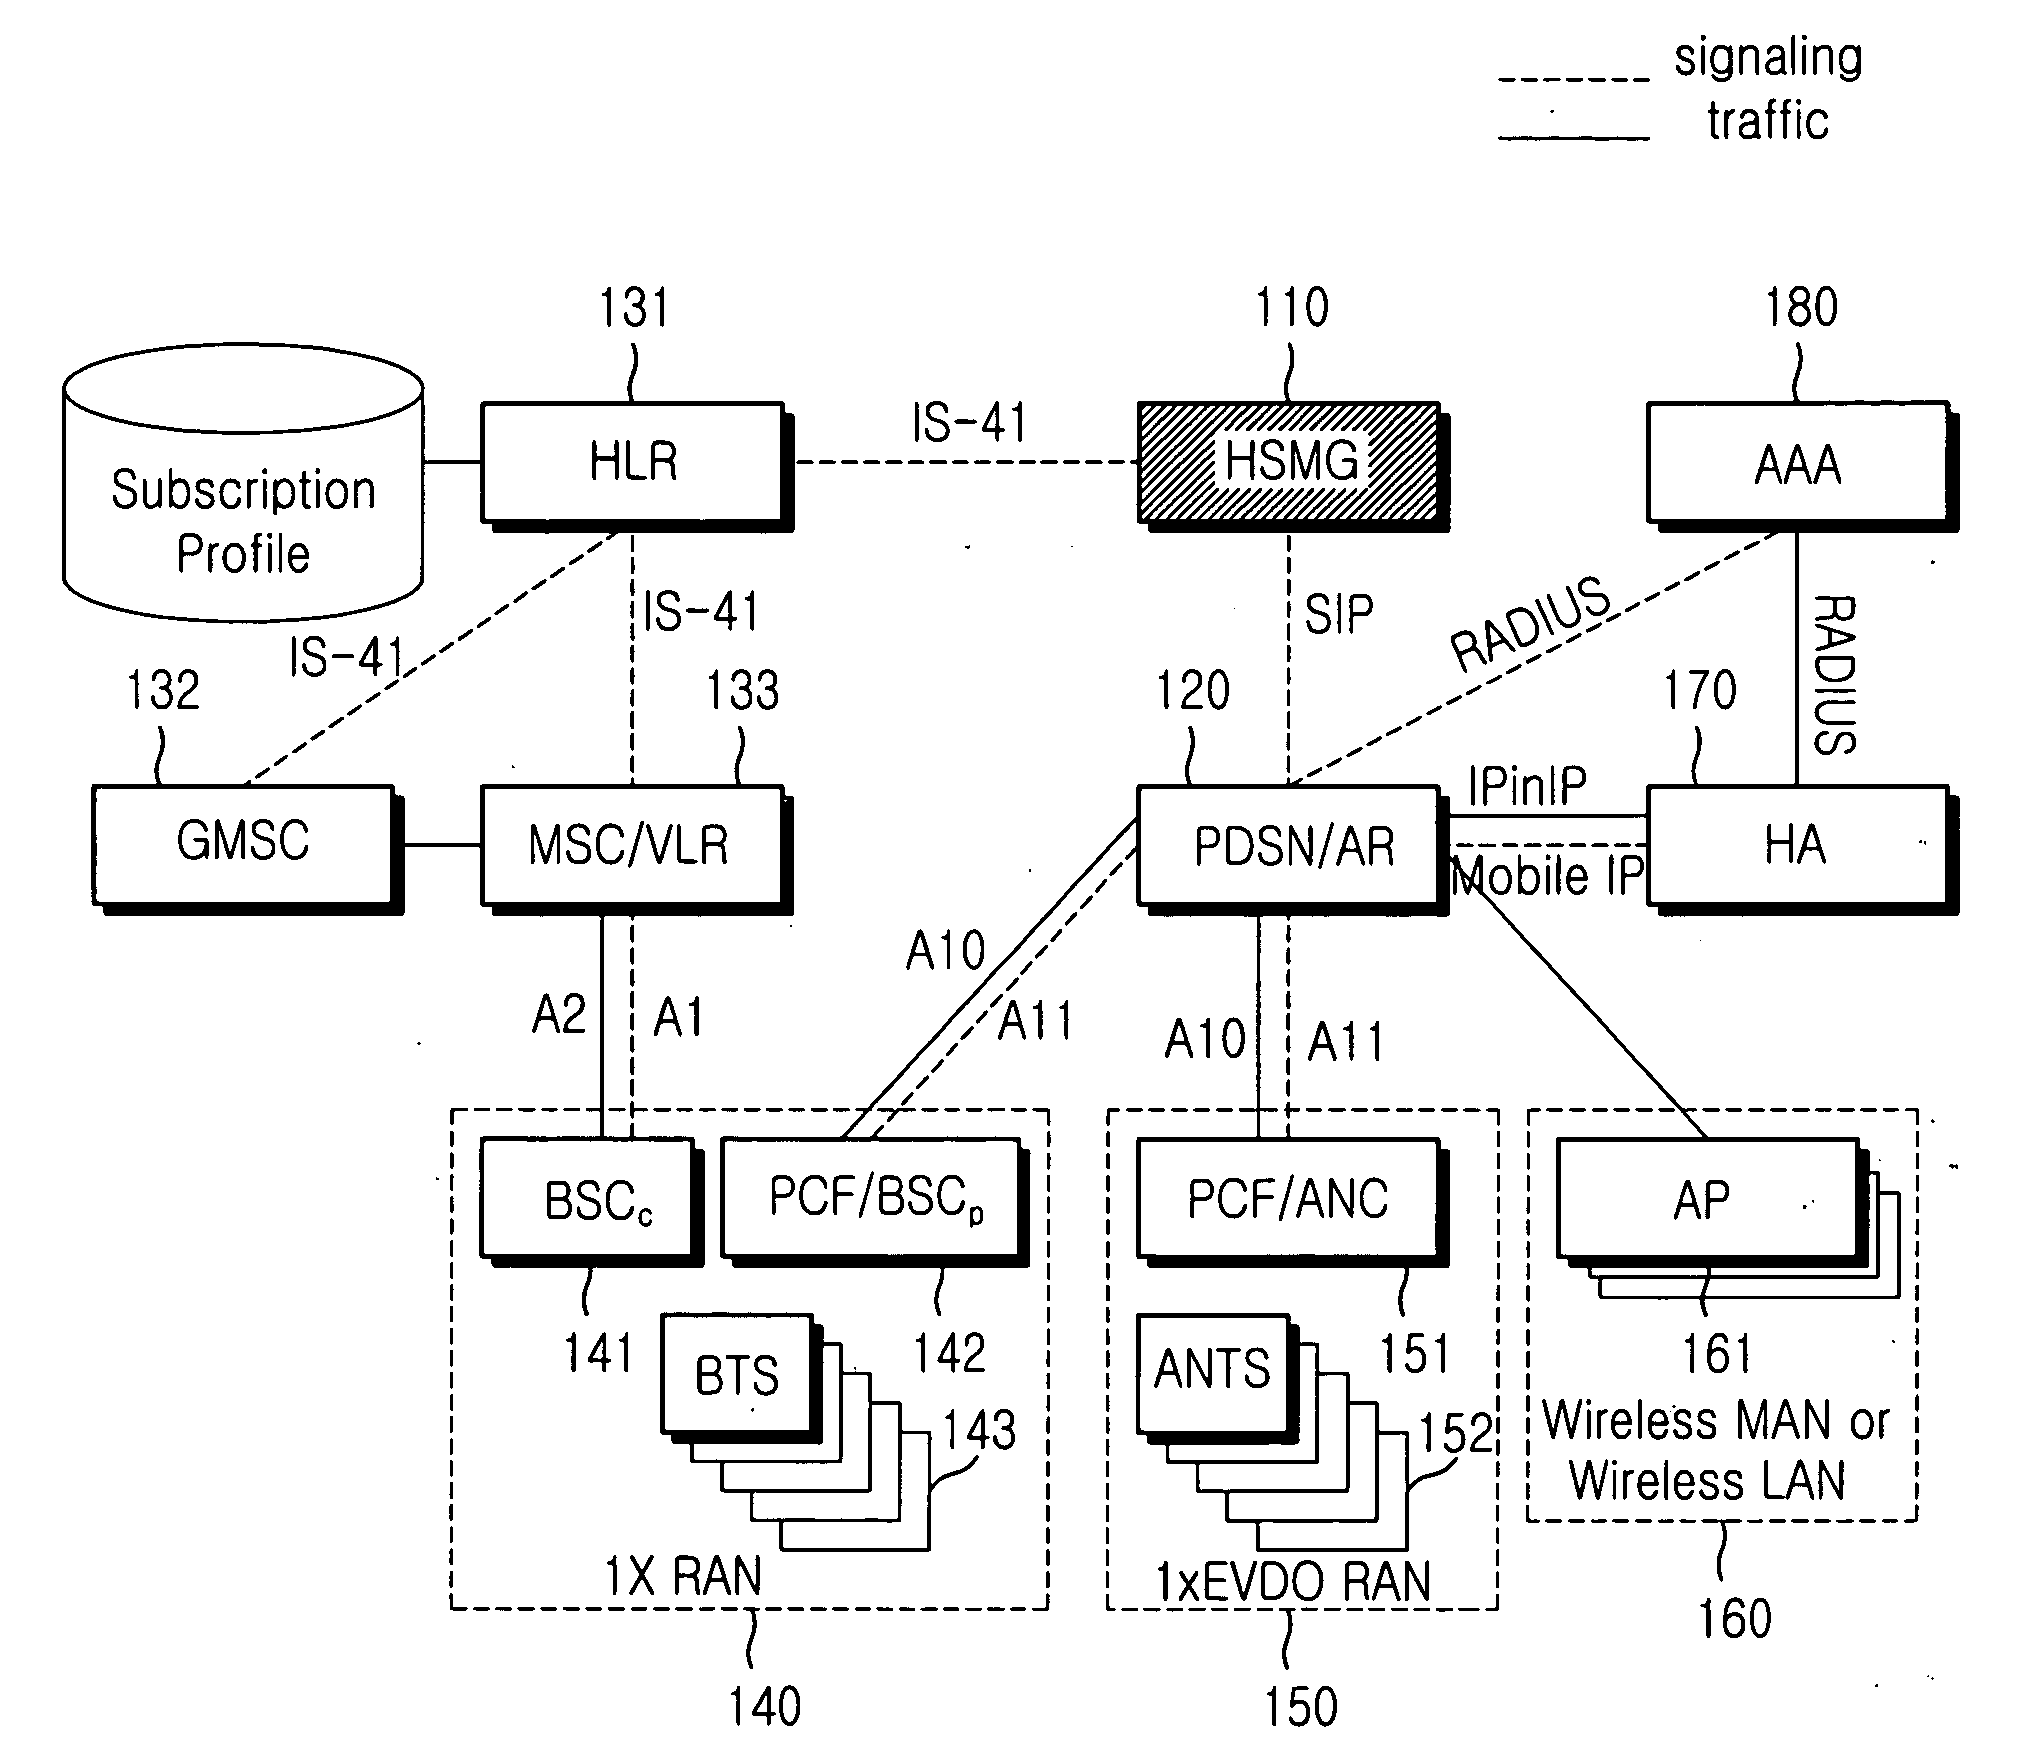 Method and apparatus for providing voice and data services in a mobile communication system with various overlapped access networks